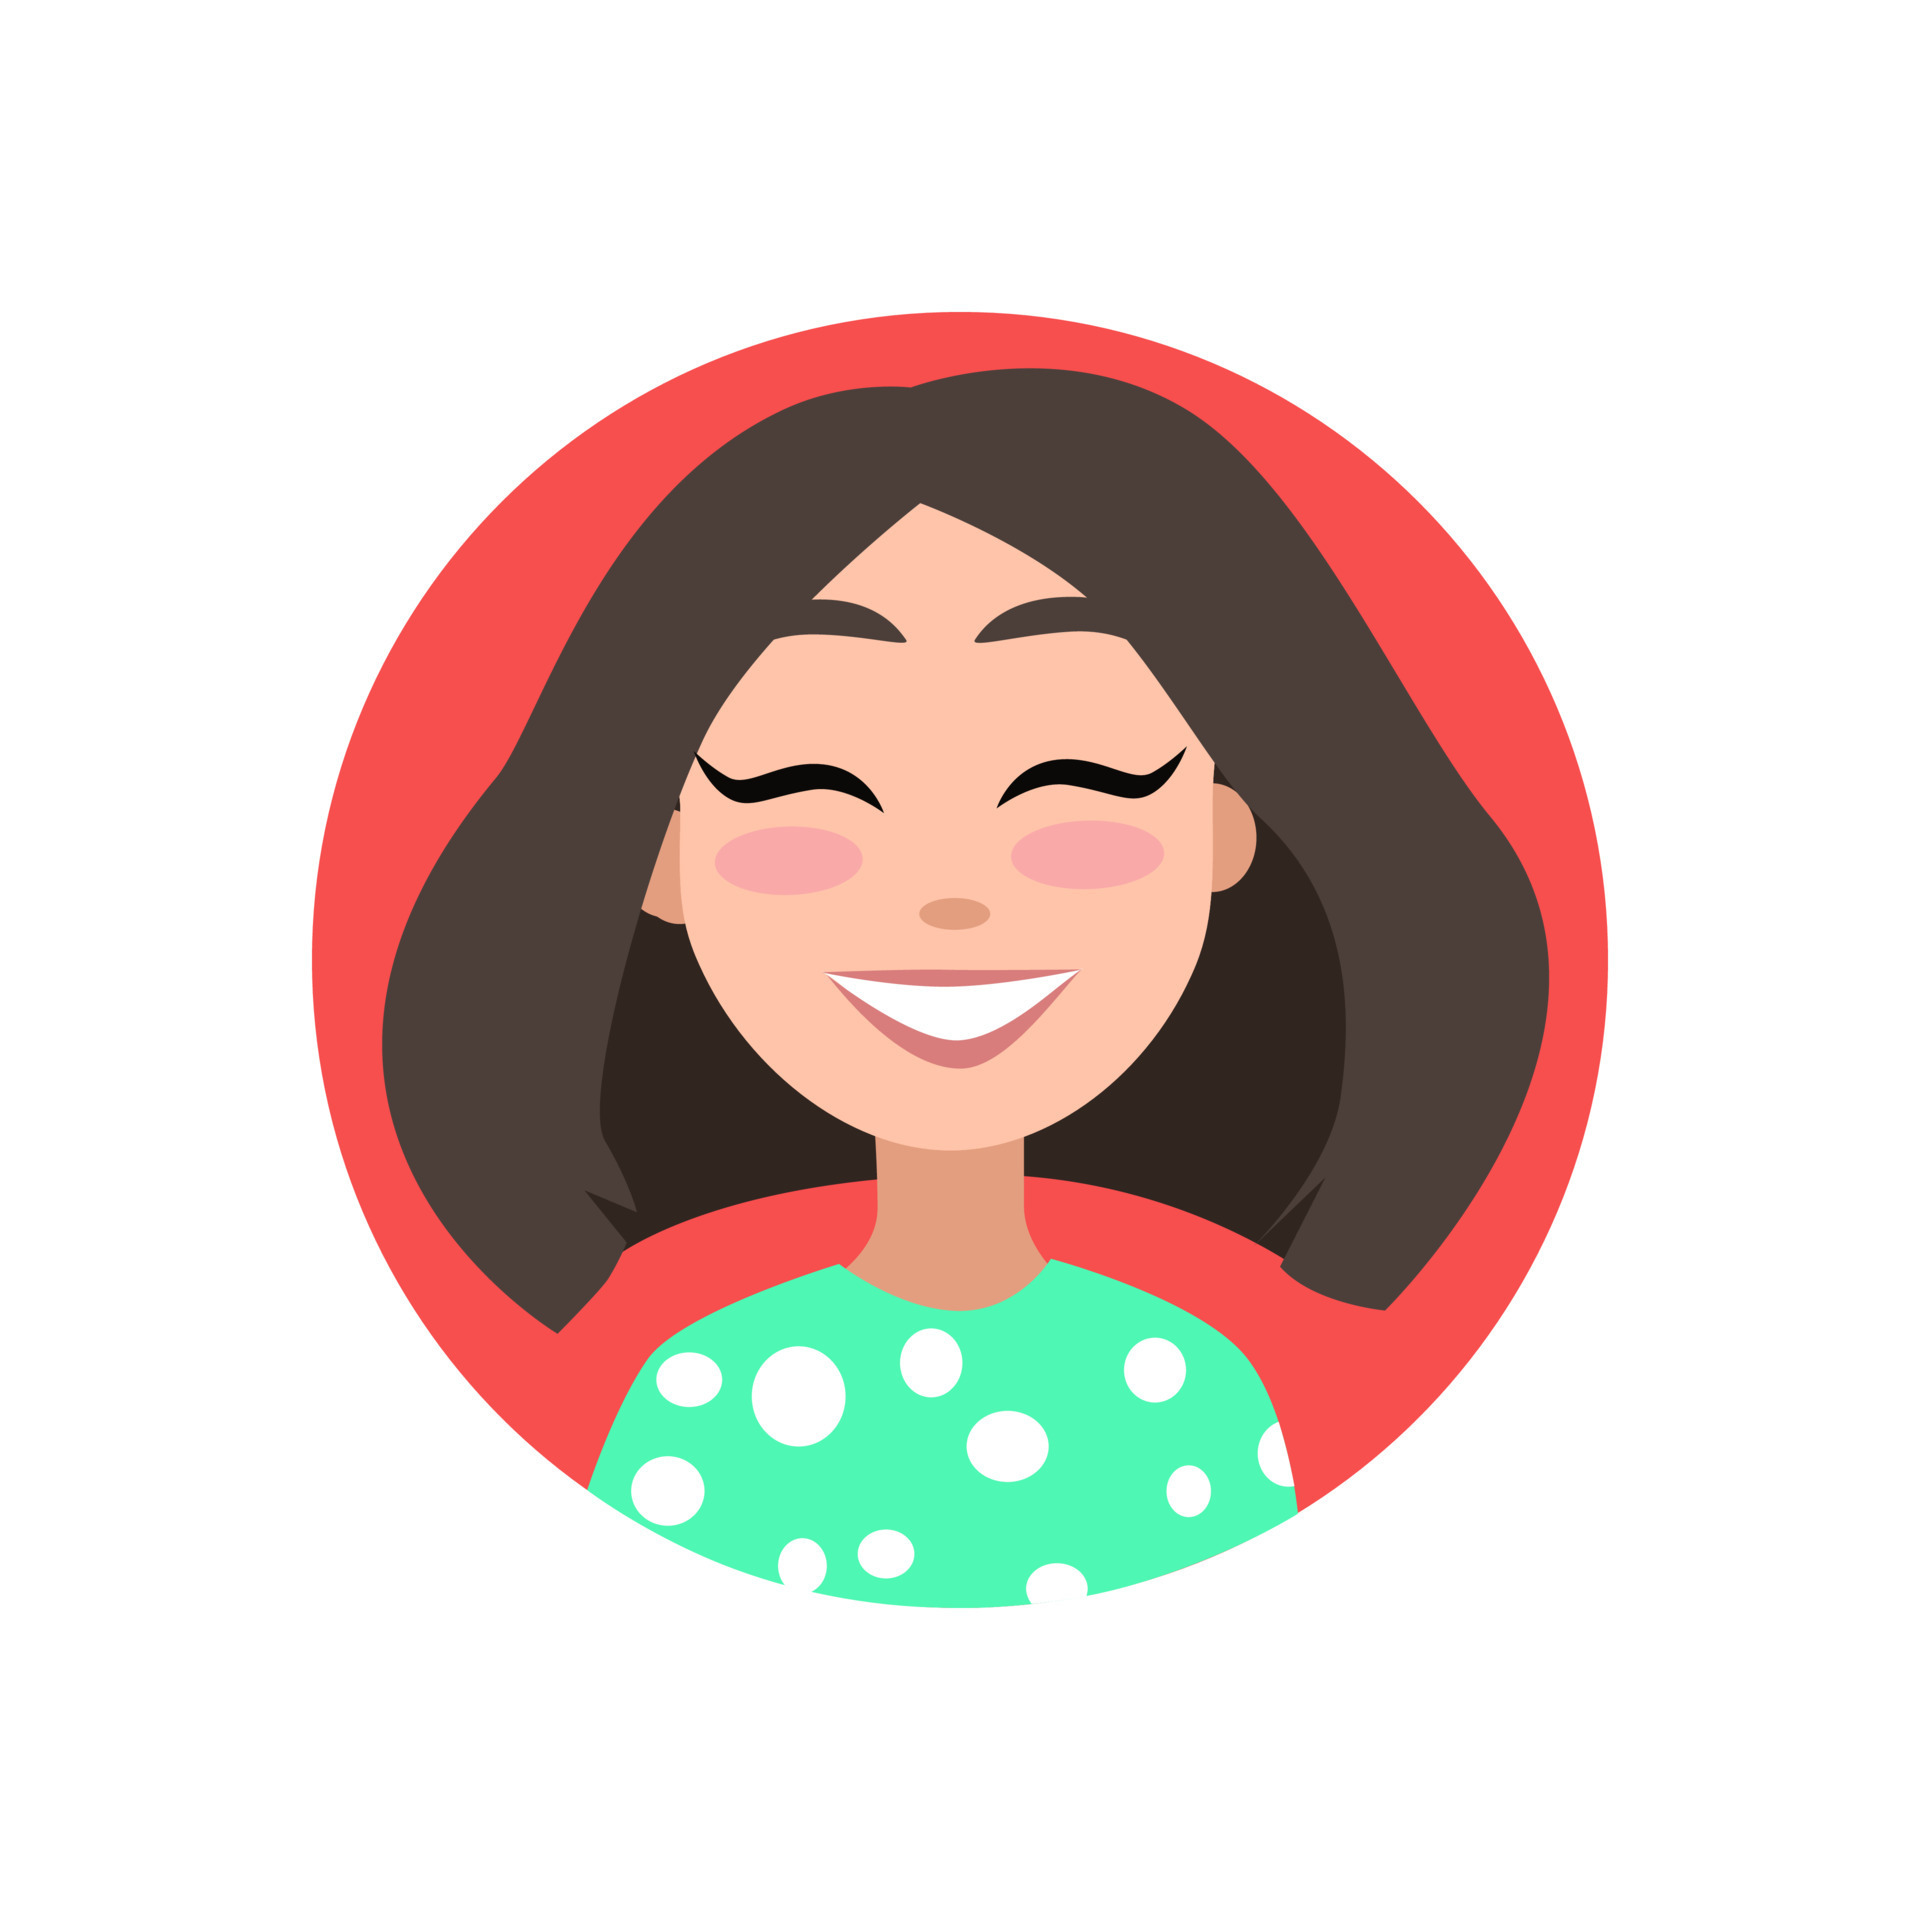 Free Avatar Illustrations Download Free Avatars For Your Website Or App